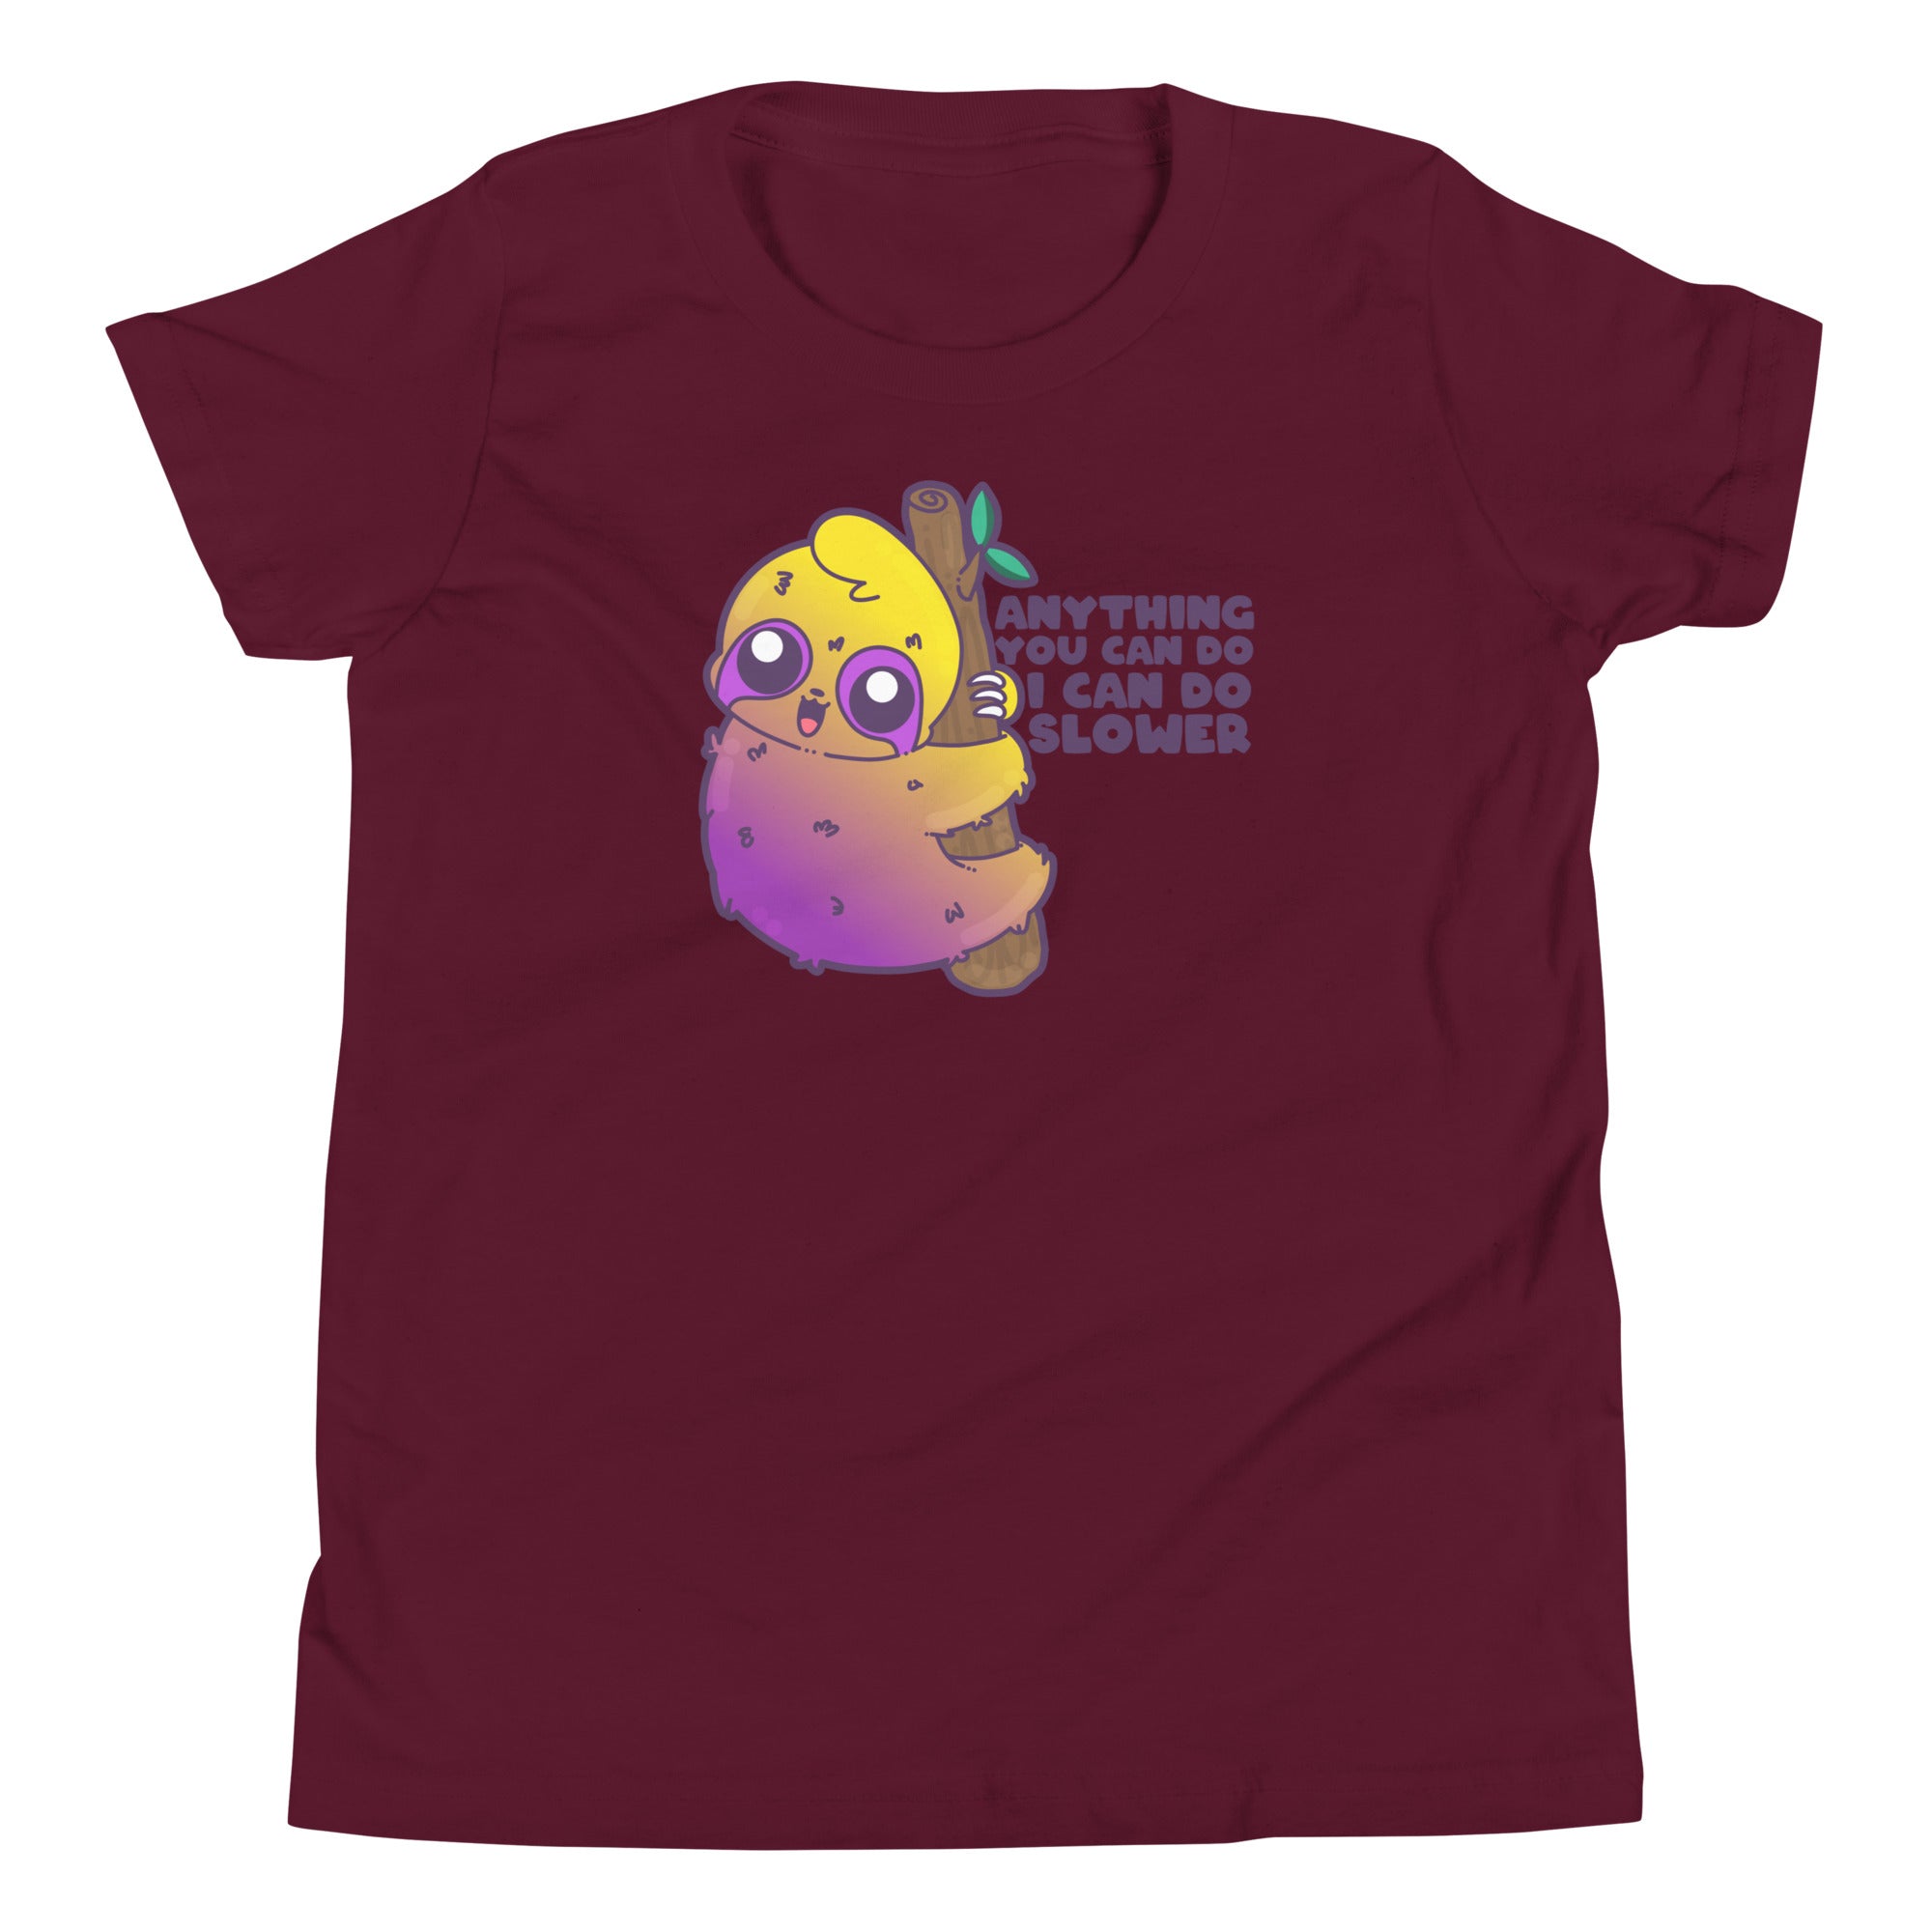 ANYTHING YOU CAN DO I CAN DO BETTER - Kids Tee - ChubbleGumLLC